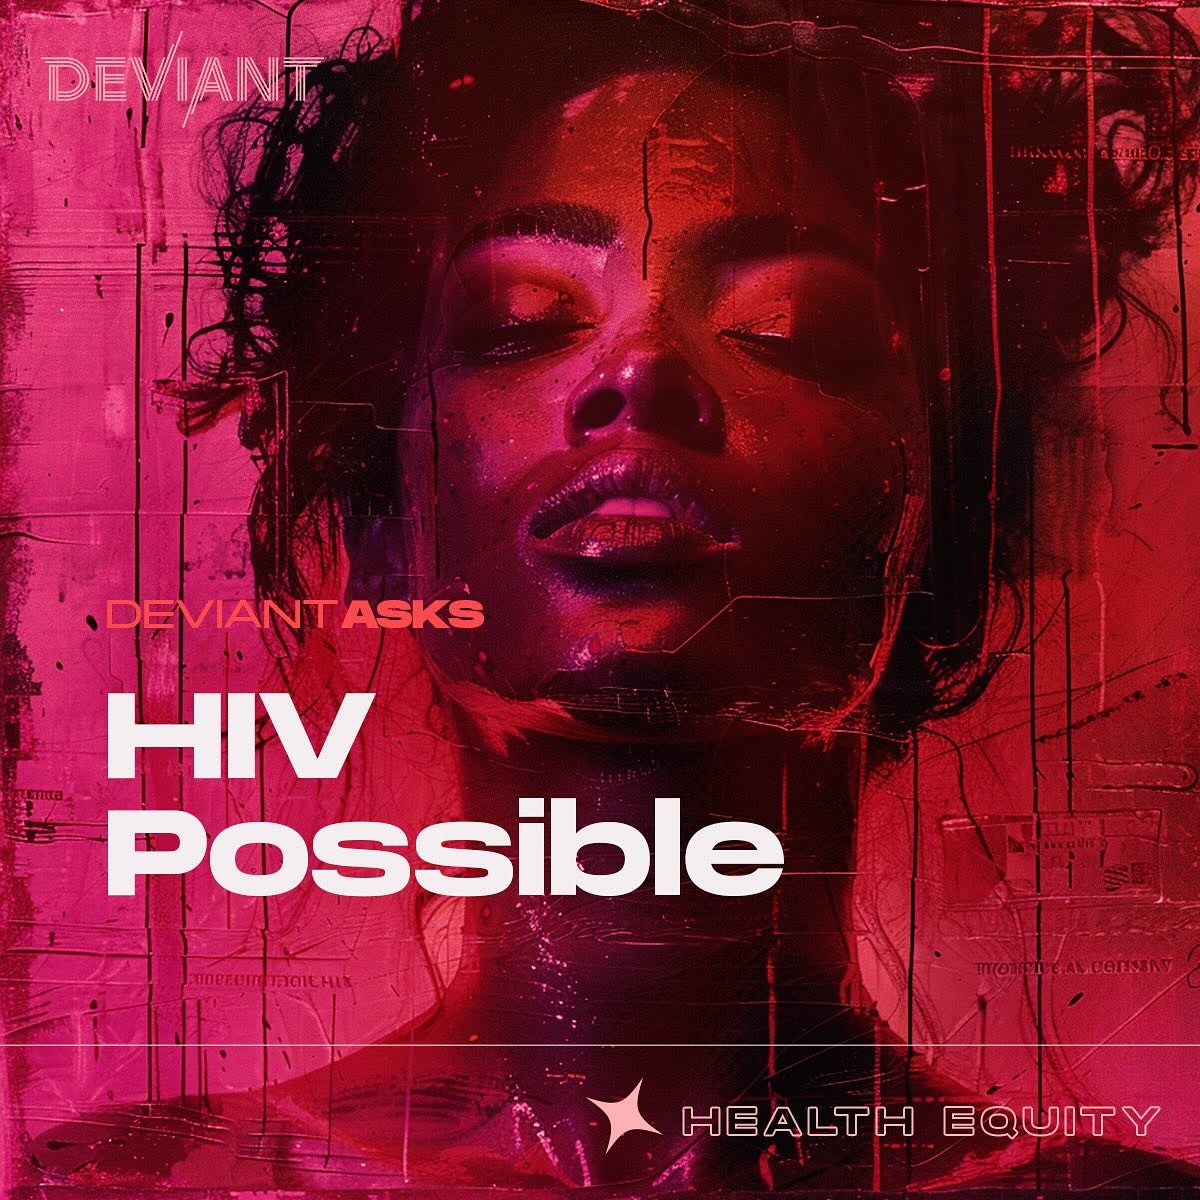 Health equity means getting us ALL the information, resources and services we need to thrive. #HIVpossible